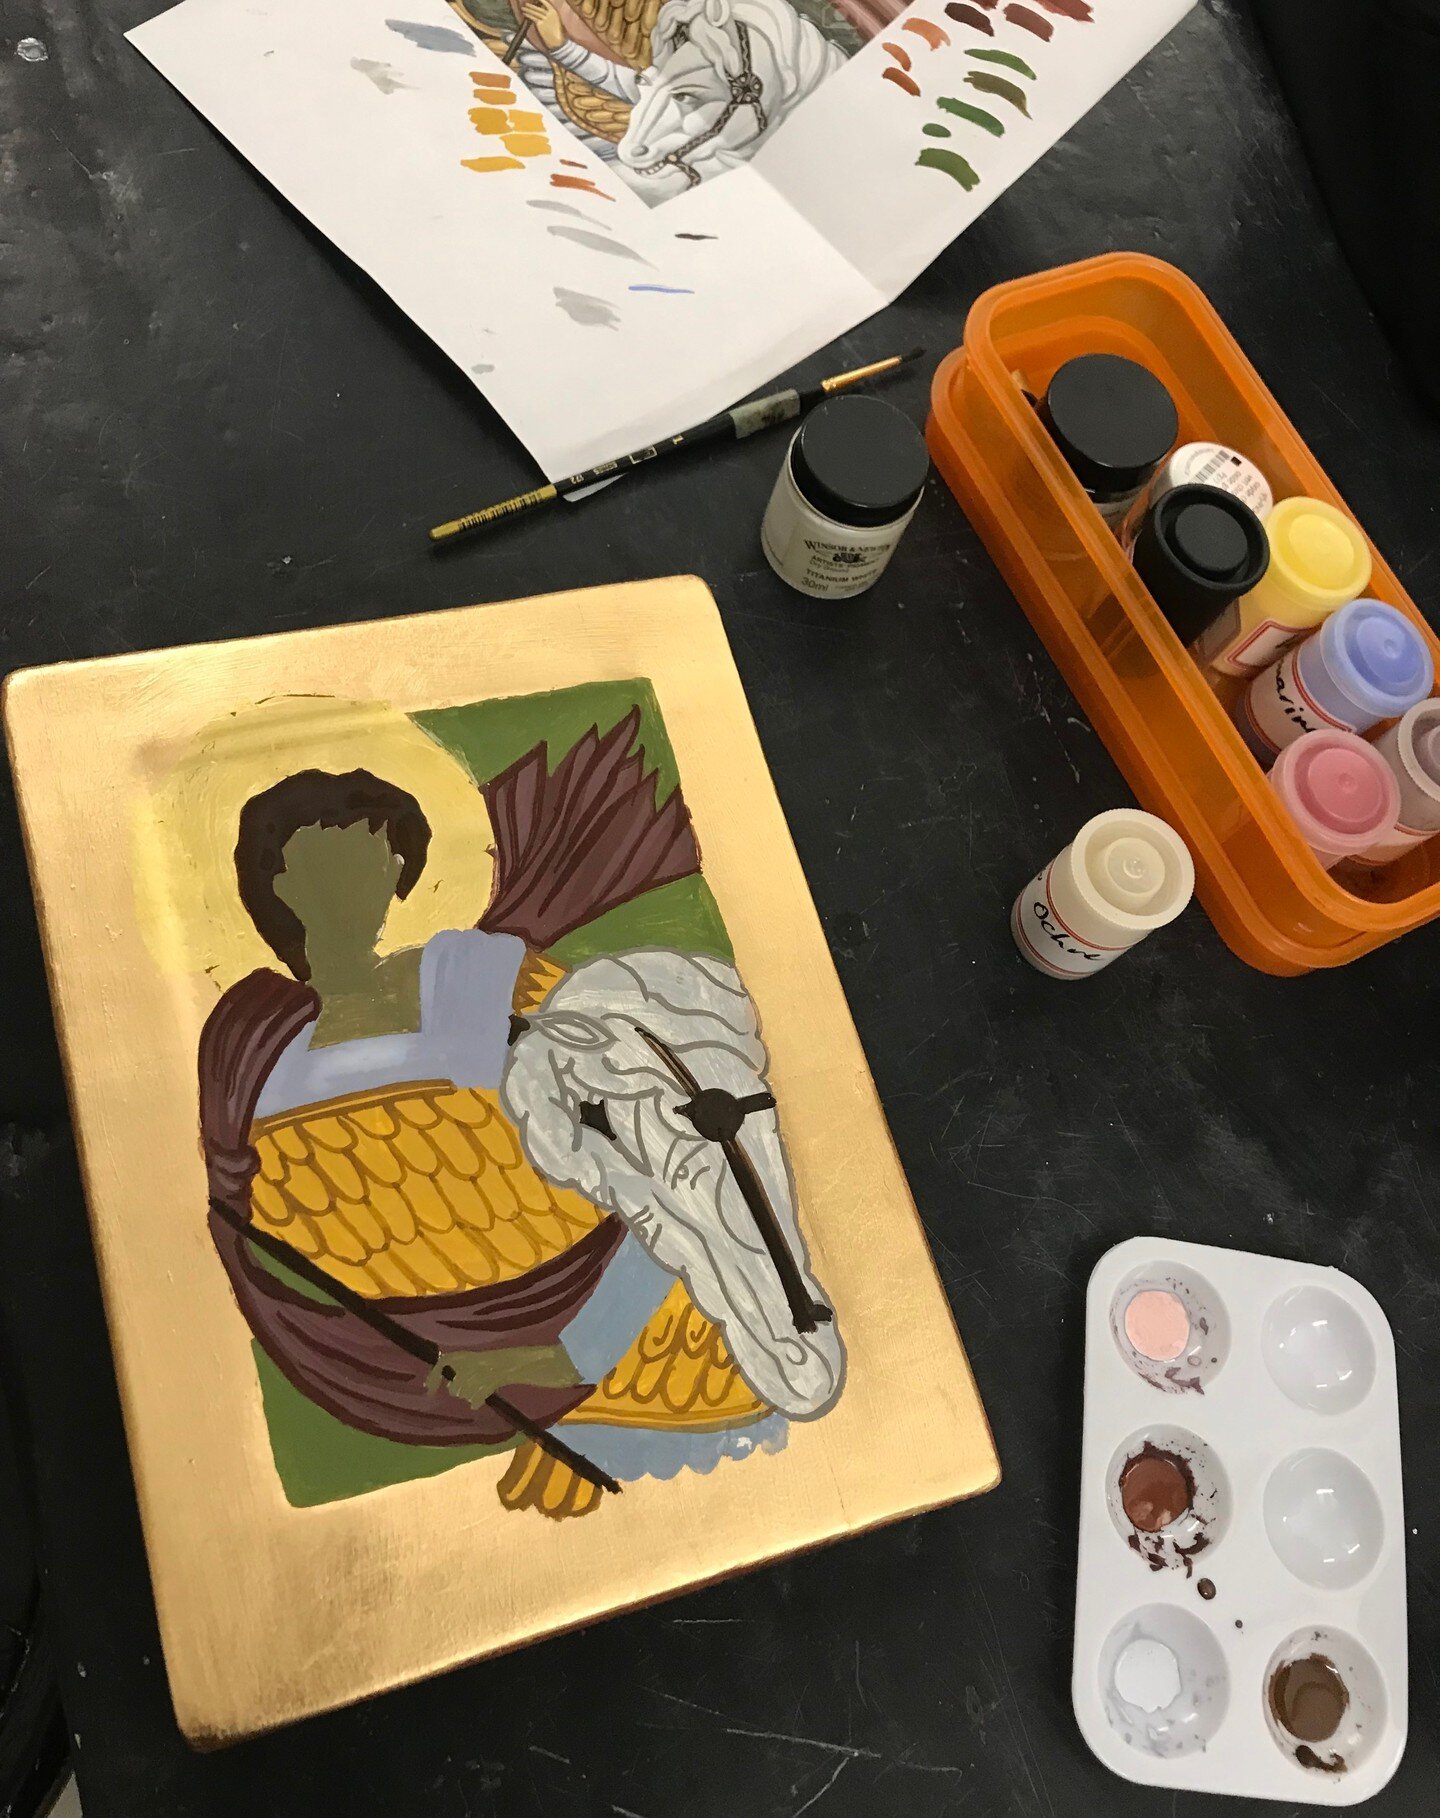 Take a glimpse into the world of ancient egg-tempera painting with these images showcasing the intricate process of crafting a traditional Byzantine icon on wood. From gold leaf and base color application to working with powdered pigments and emulsio